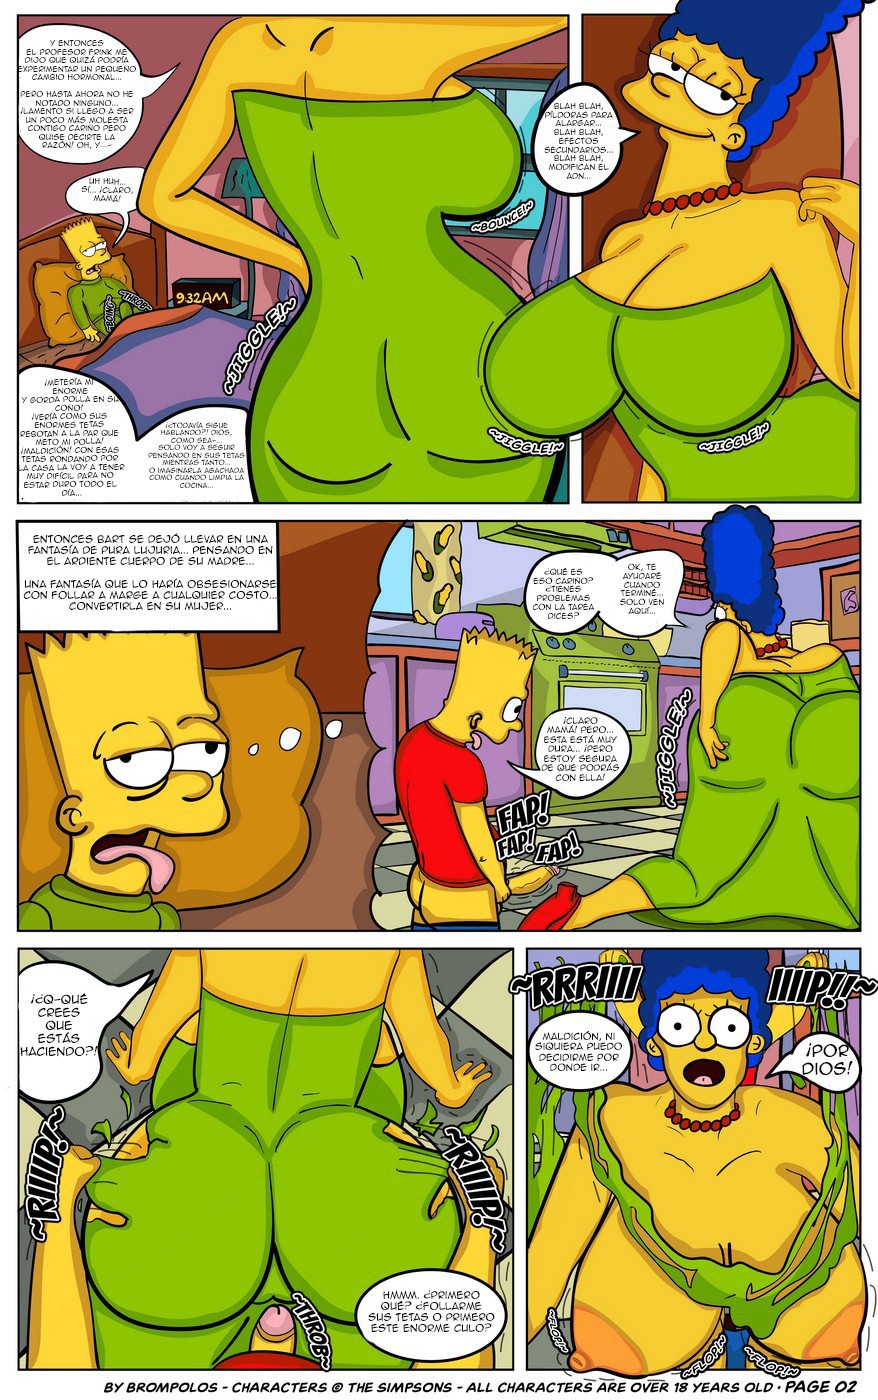 The-Simpsons-are-The-Sexenteins-4.jpg